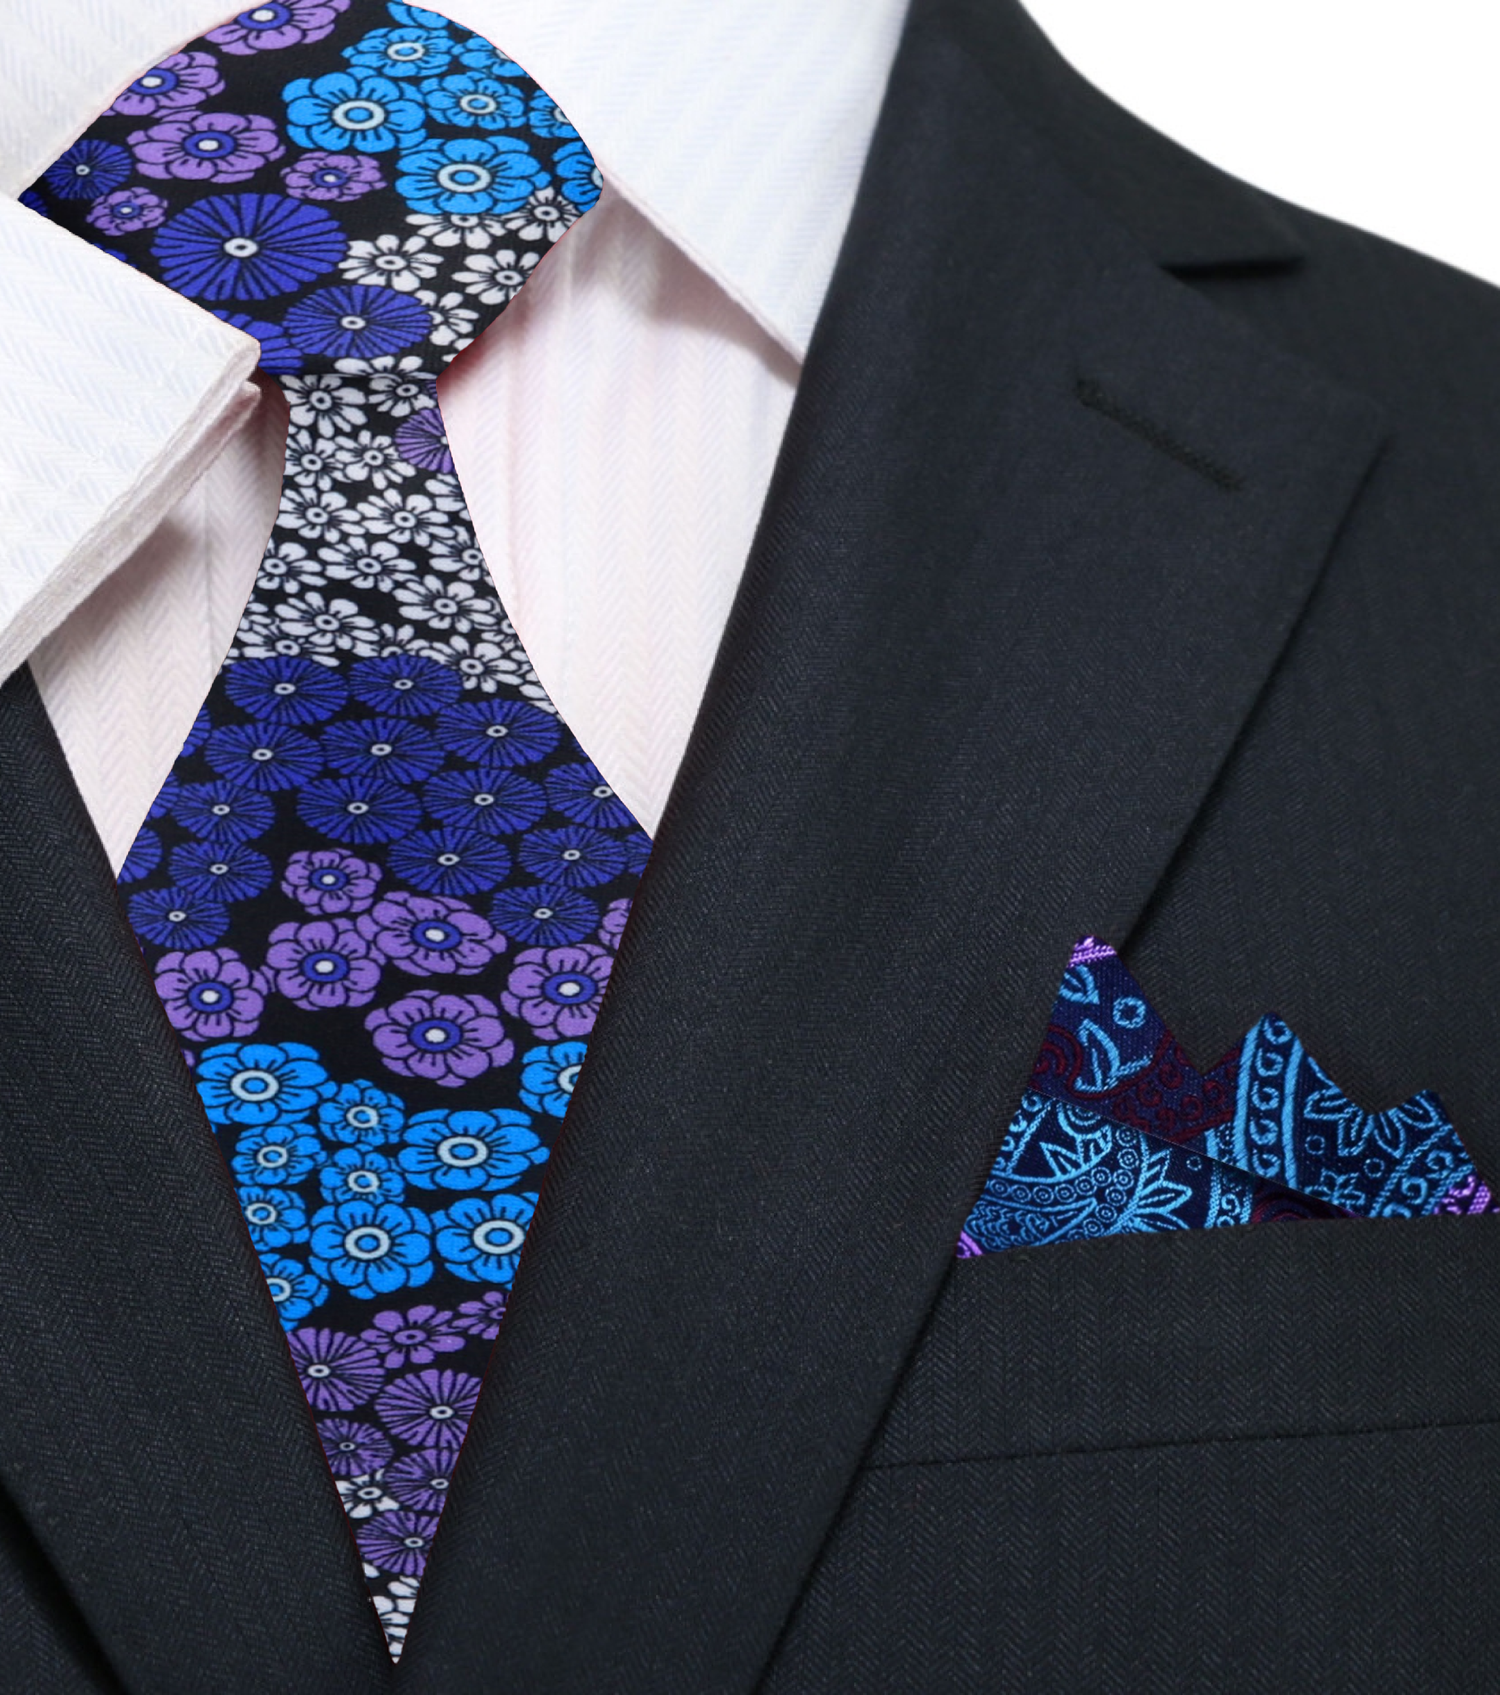 Blue, Purple and White Flowers Necktie and Accenting Blue and Purple Paisley Square